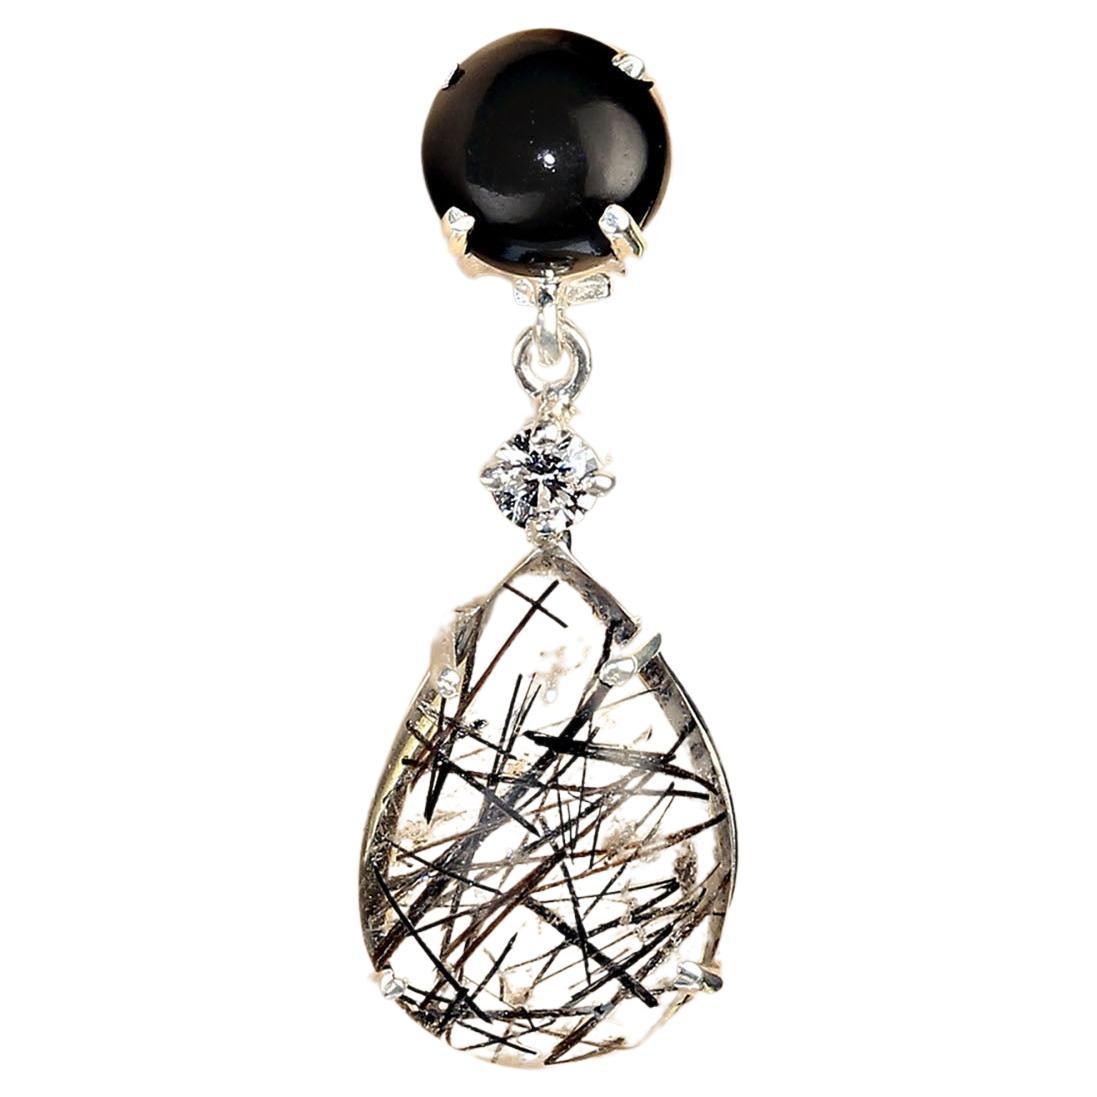 Tourmalinated quartz and black onyx and dangle earrings in sterling silver. These elegant and sophisticated earrings dangle 1.13 inches and feature posts and push backs. The pear shaped cabochon tourmalinated quartz total 9.88ctw. The round cabochon